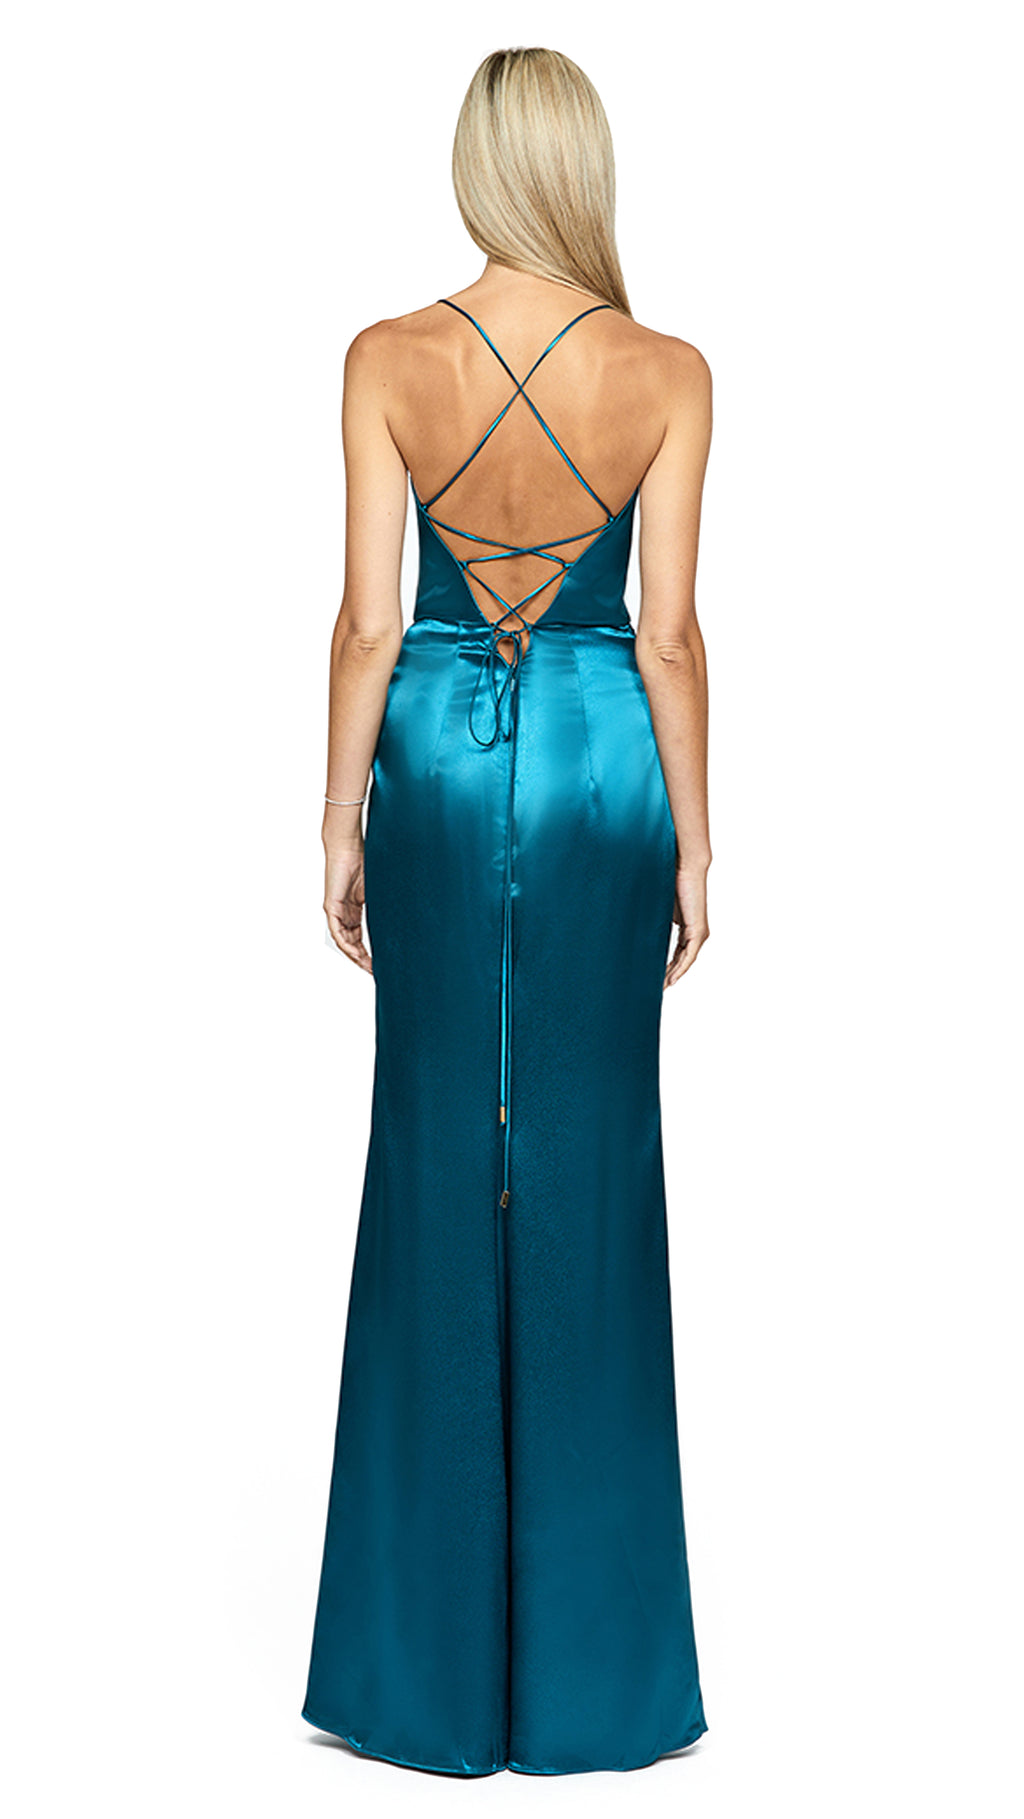 Katrina Corset Gown in Teal Green BACK